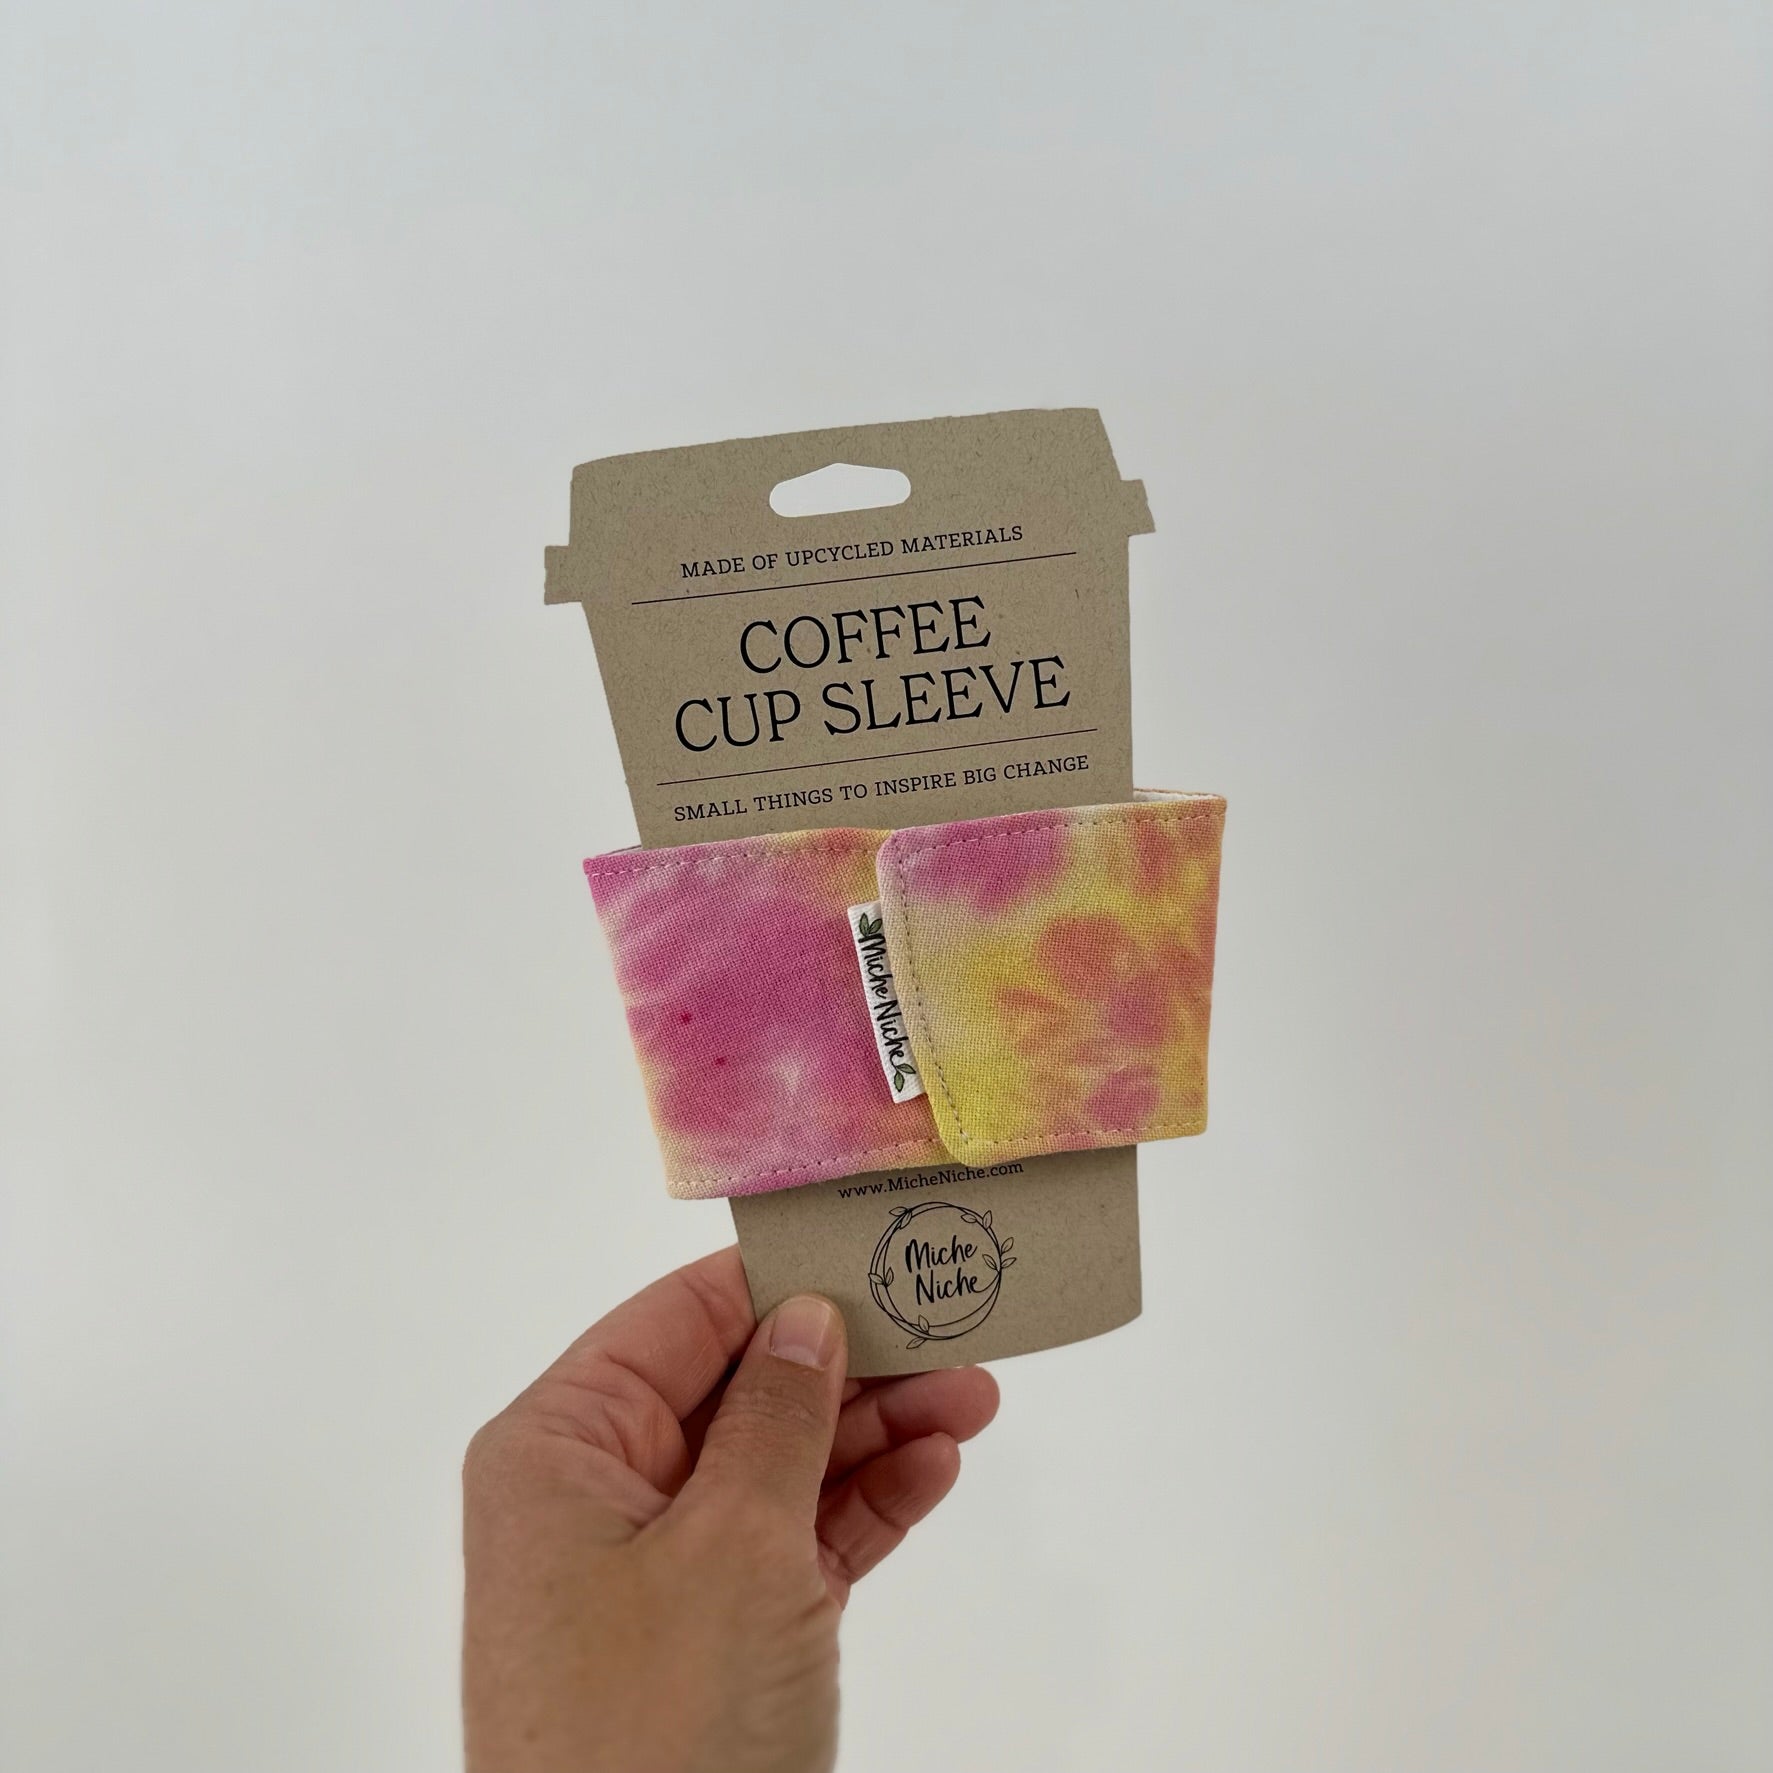 Front view of Miche Niche coffee cup sleeve in a hand dyed tie due pattern of pink, yellow, and fuchsia